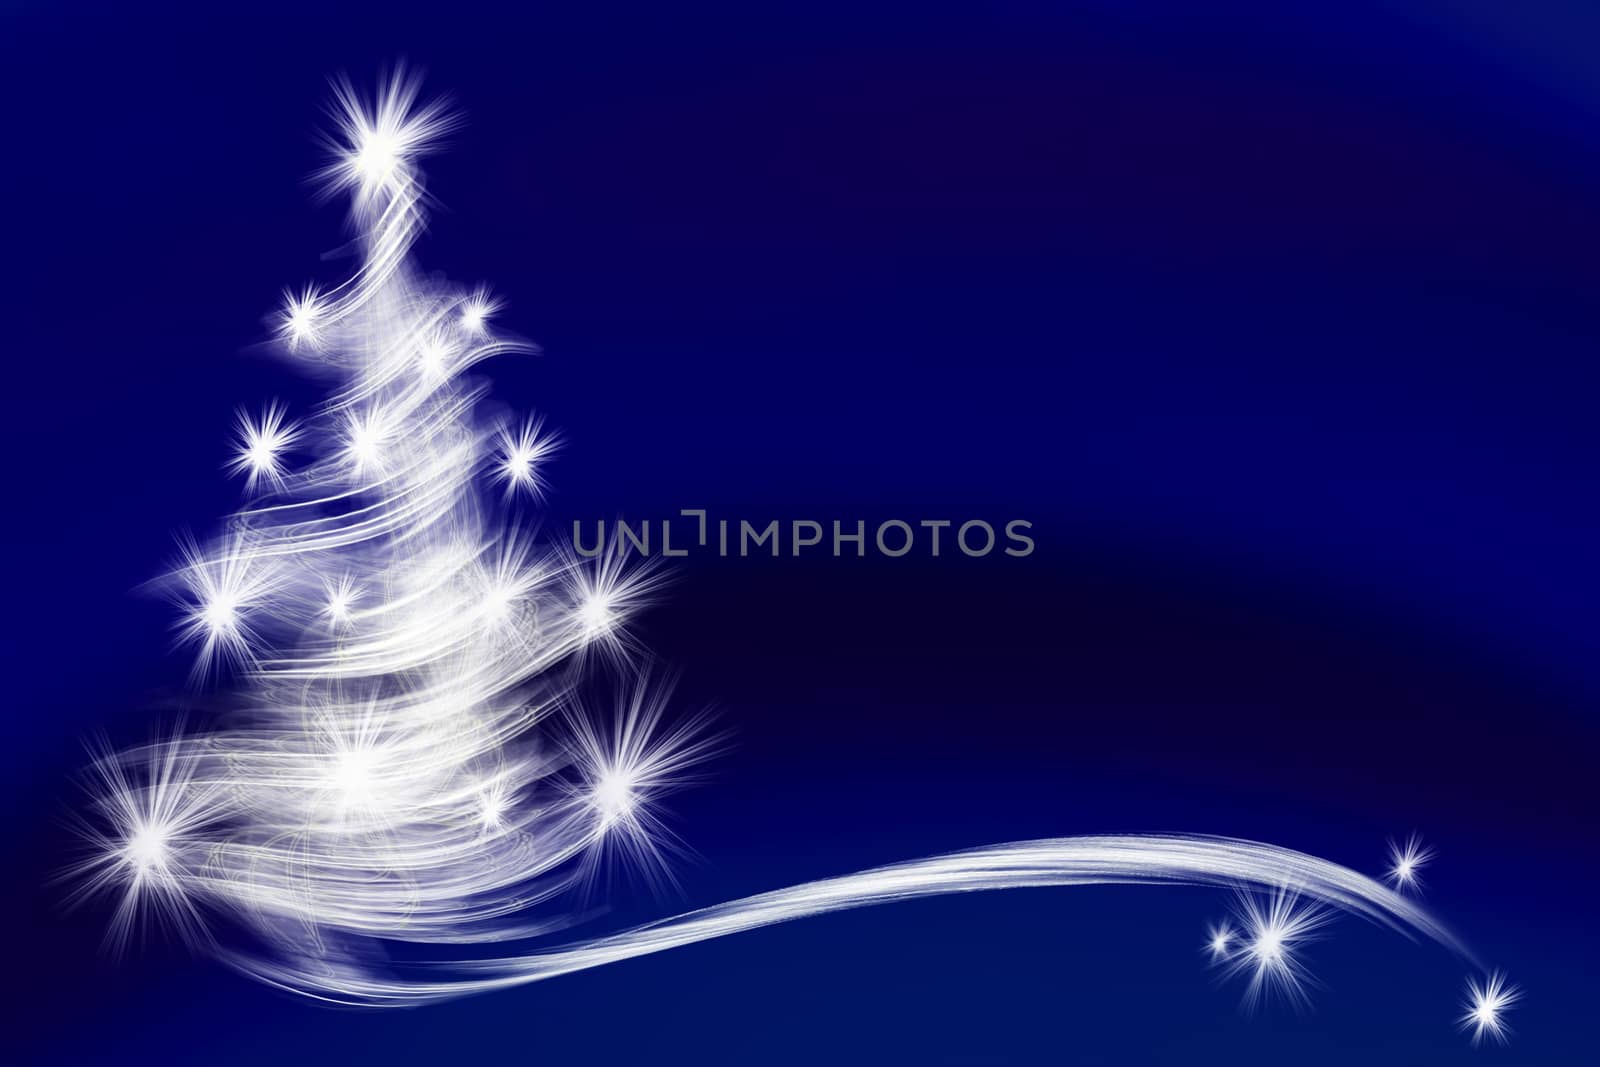 christmas tree on blue background with stars